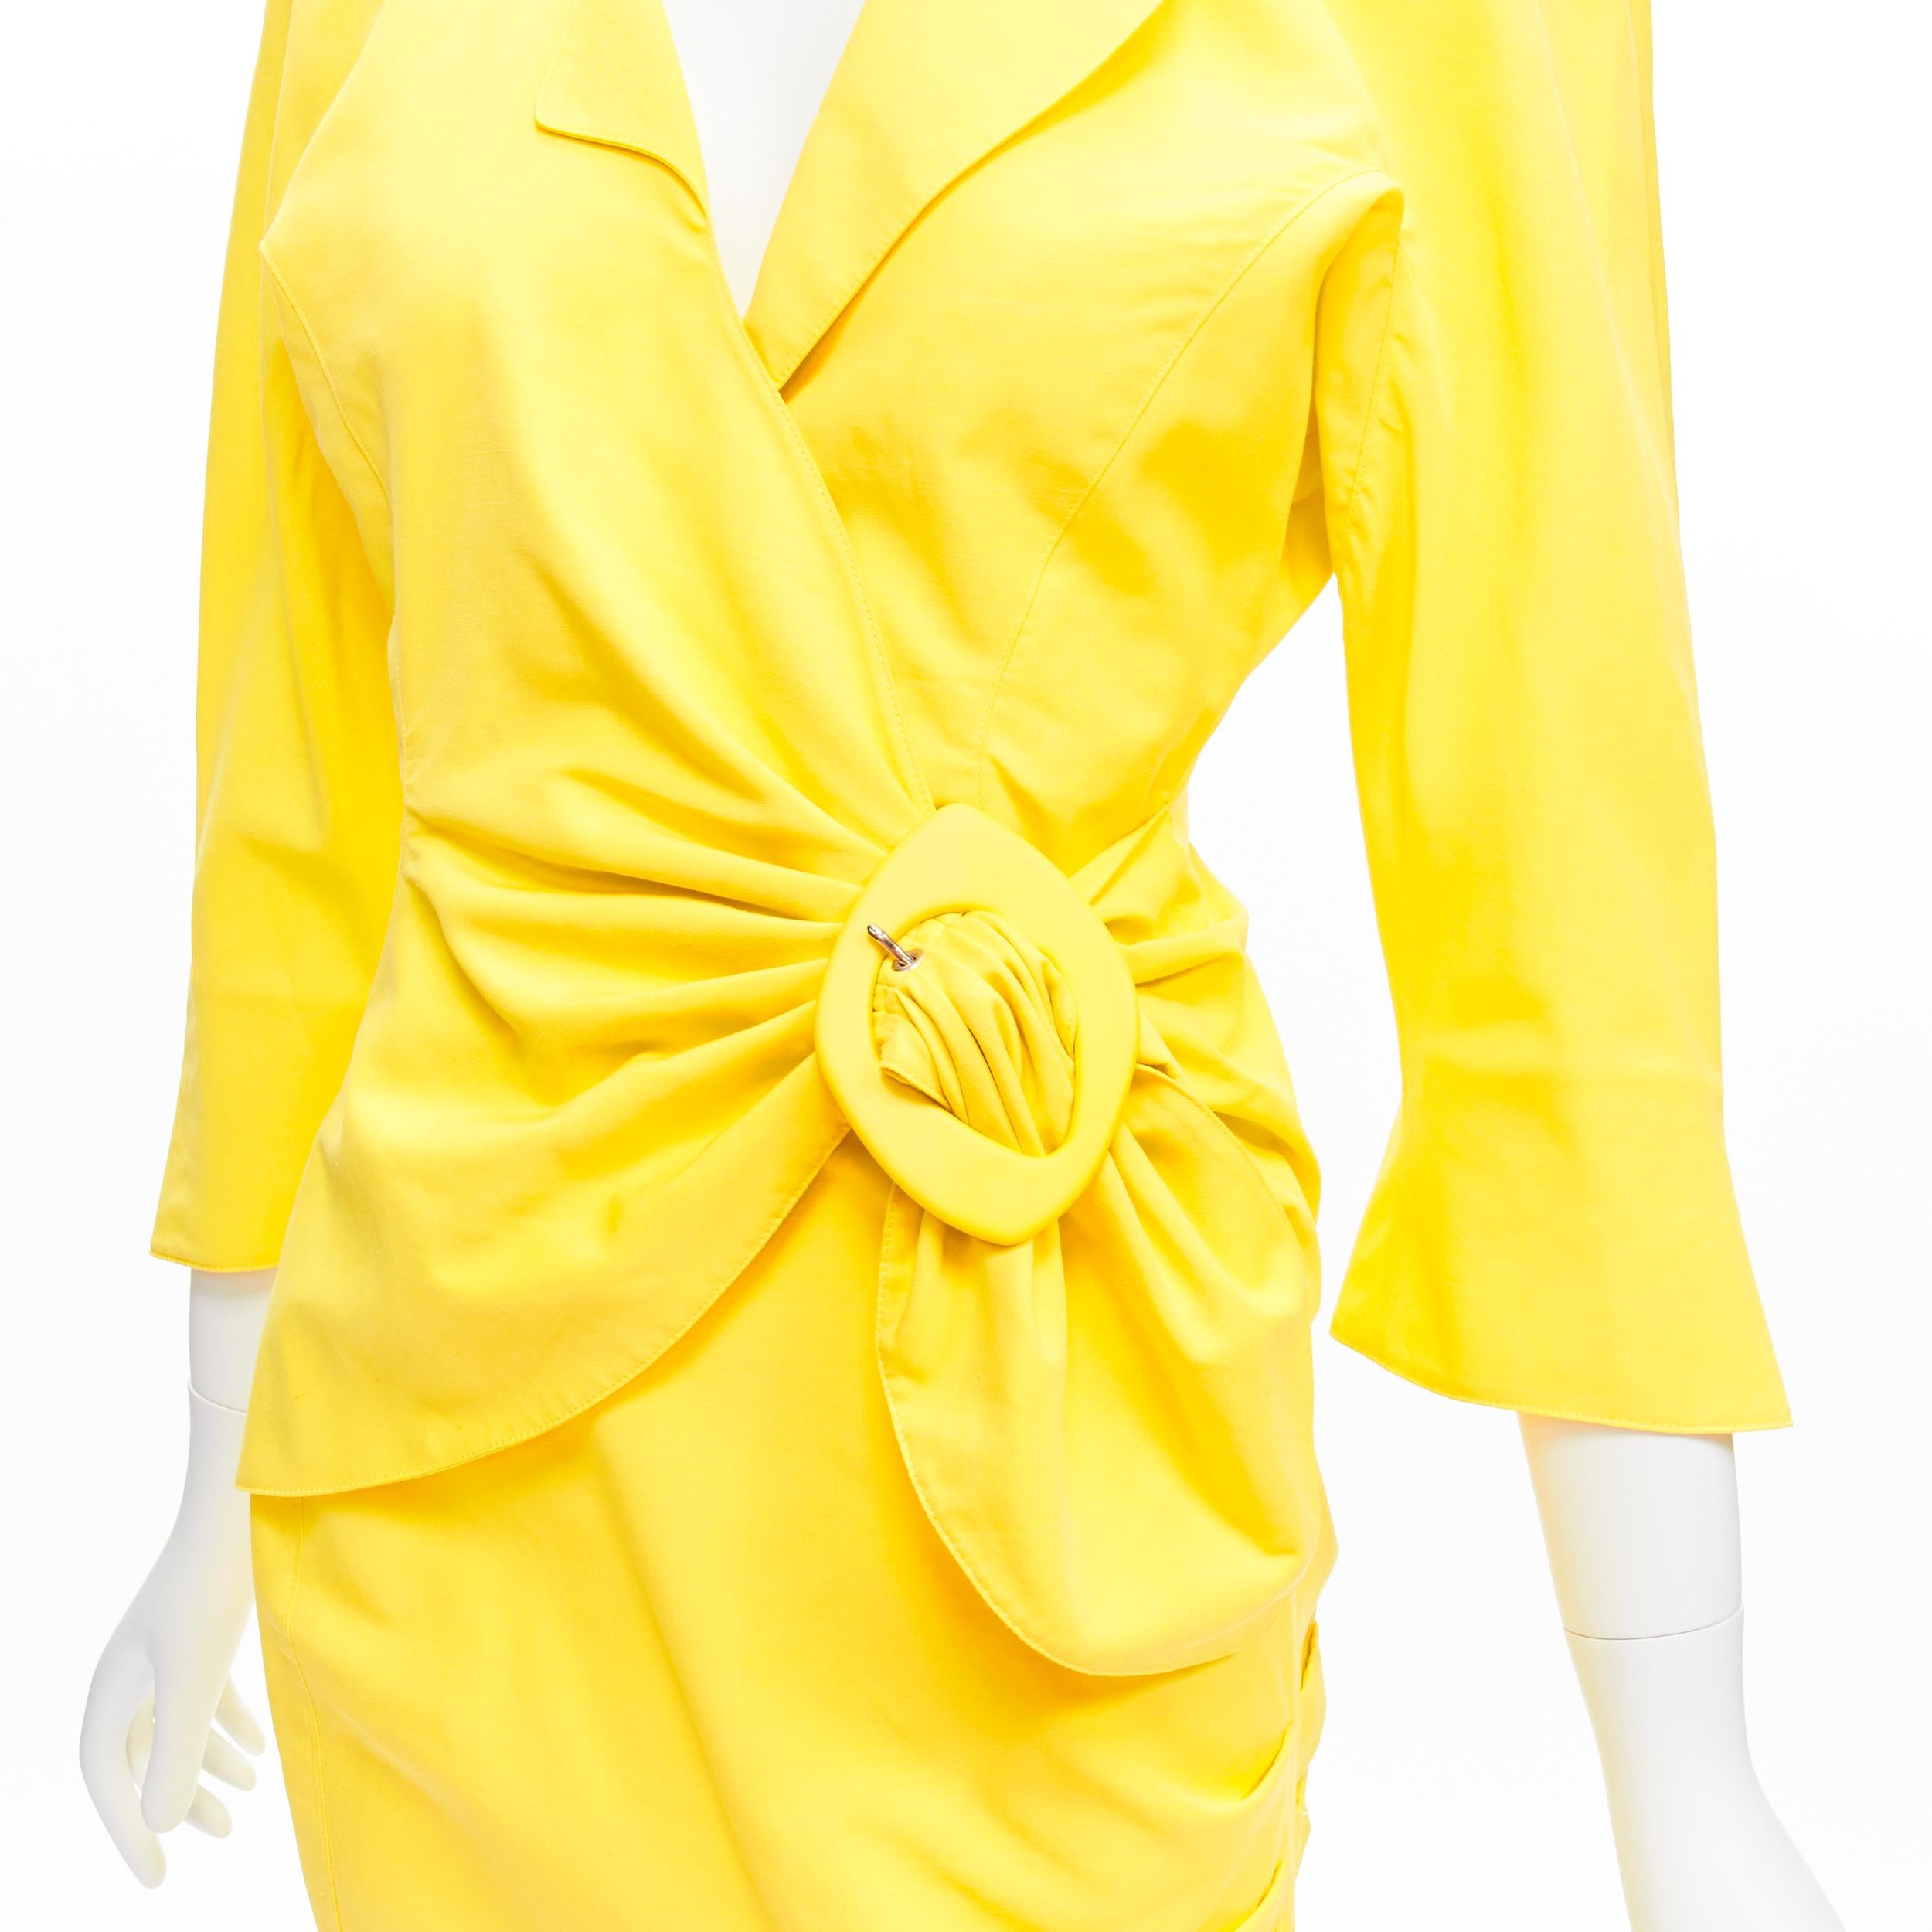 THIERRY MUGLER Vintage bright yellow wrap front vampire collar ruffle skirt suit IT7AR
Reference: TGAS/D00121
Brand: Thierry Mugler
Designer: Thierry Mugler
Material: Polyester, Linen
Color: Yellow
Pattern: Solid
Closure: Snap Buttons
Lining: Yellow